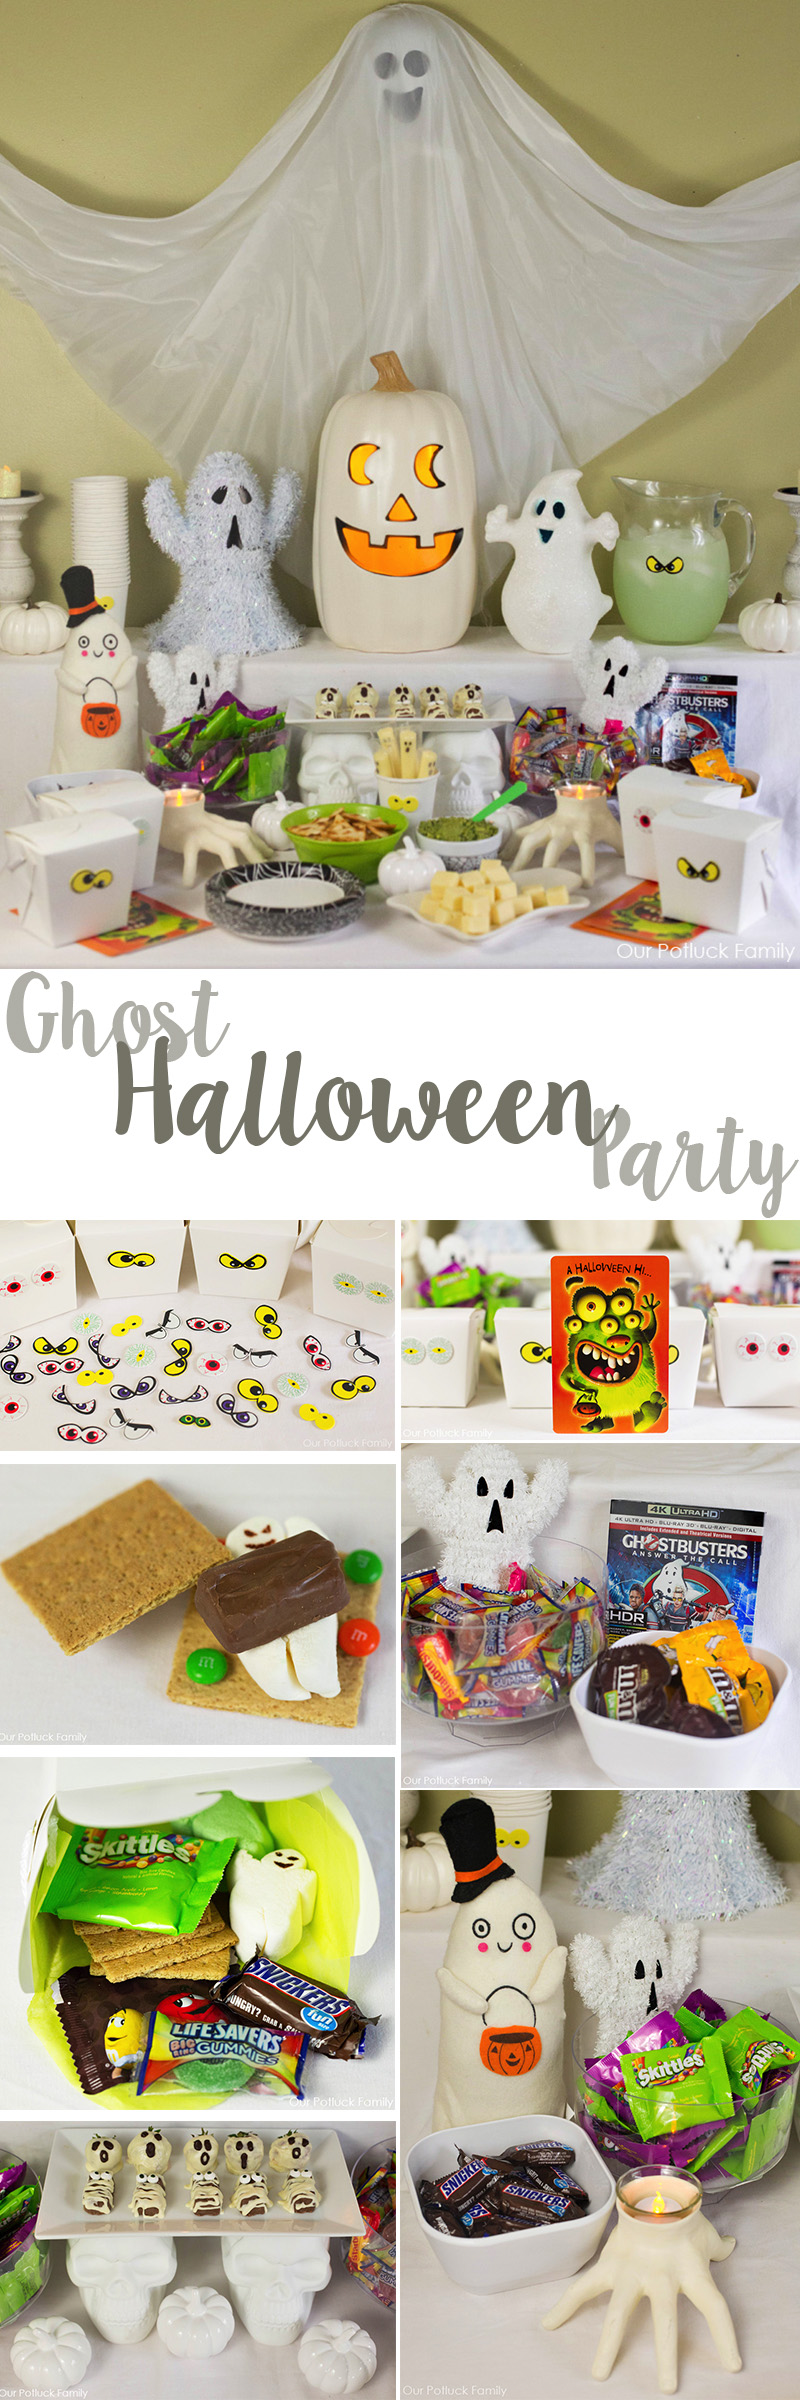 ghost-halloween-party